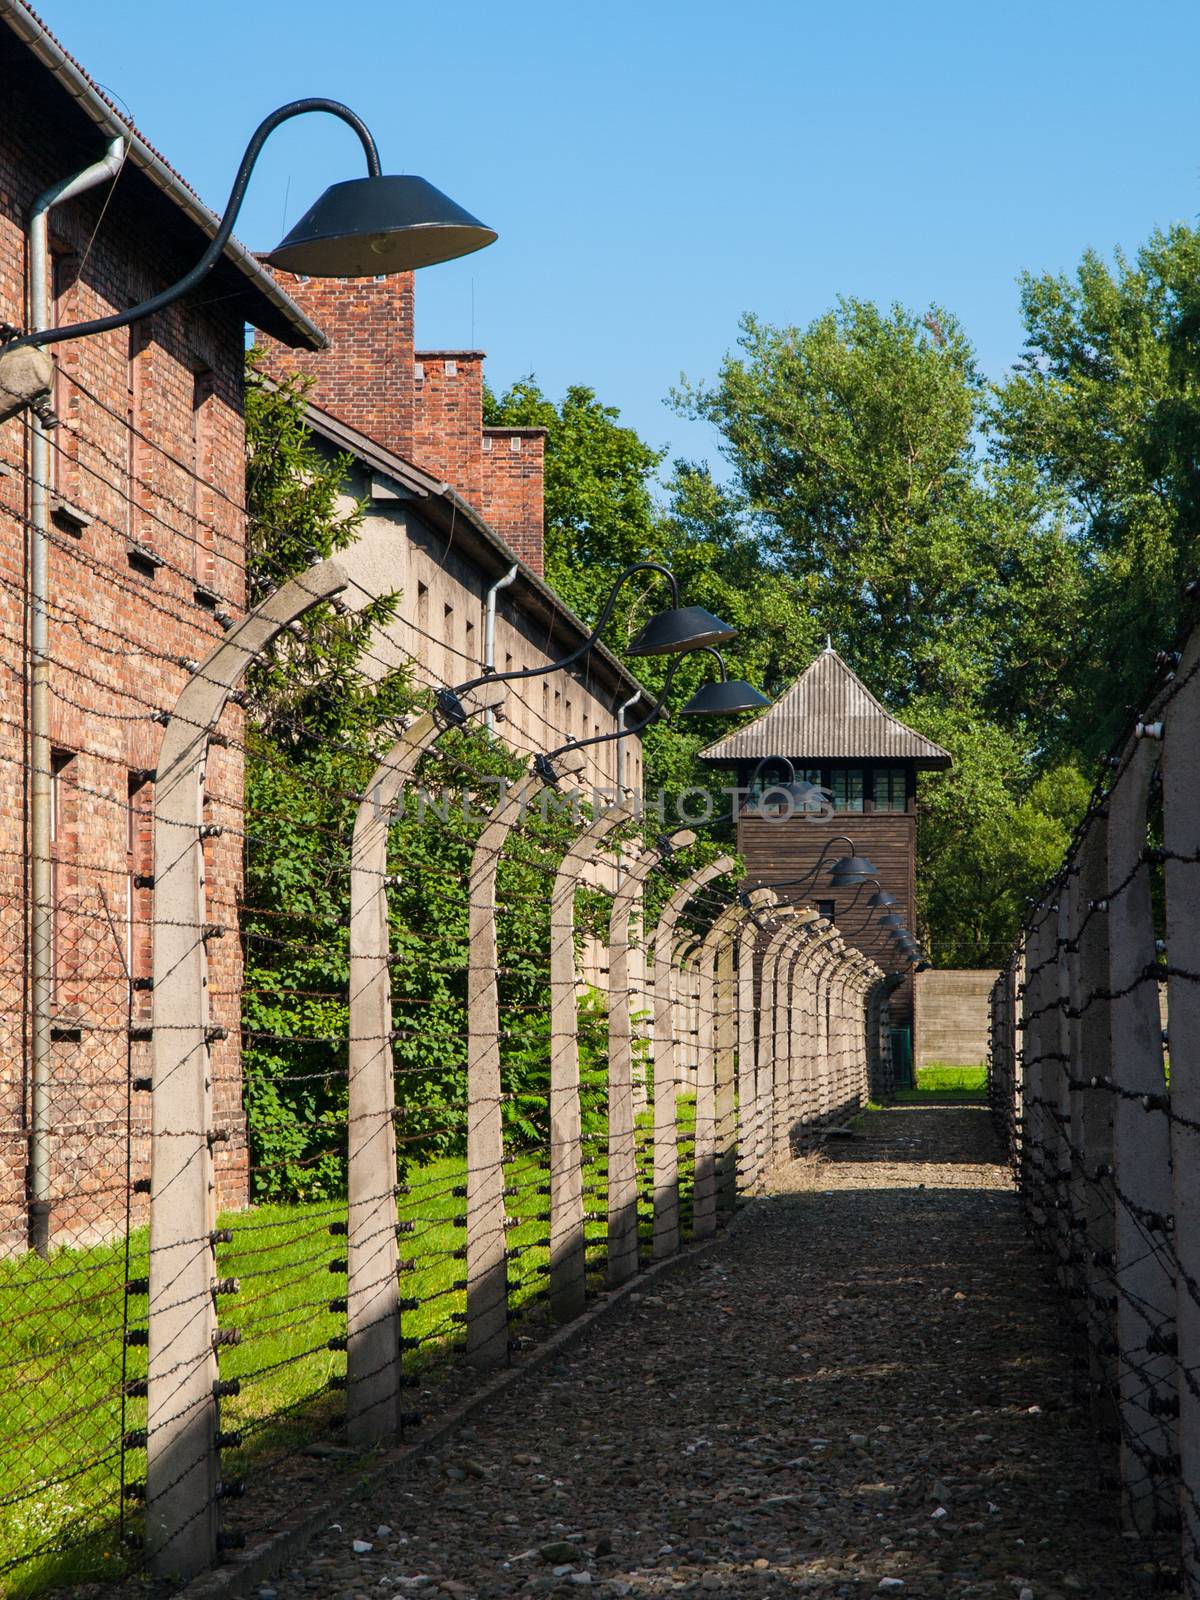 Fence around Auschwitz concentration camp by pyty